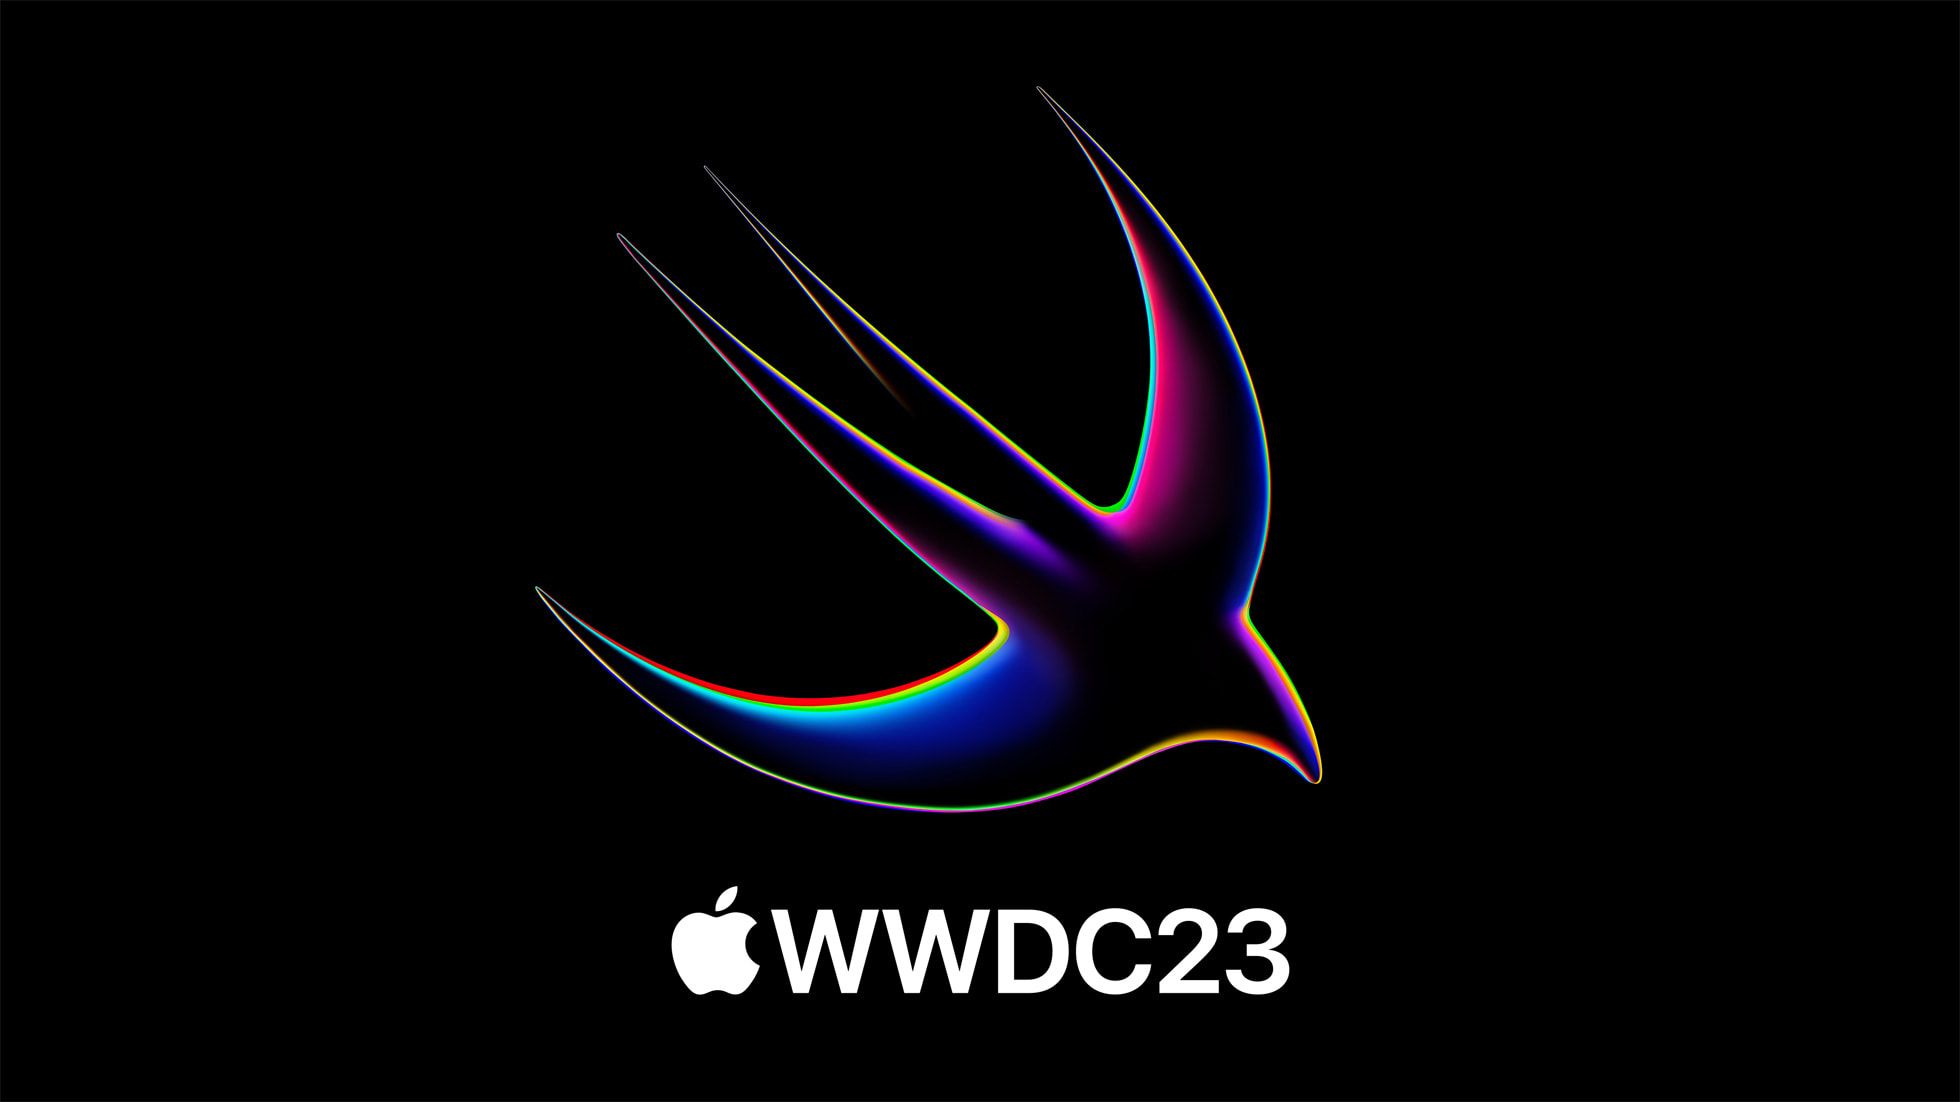 #WWDC23: The 10 biggest product updates at Apple's annual developer conference